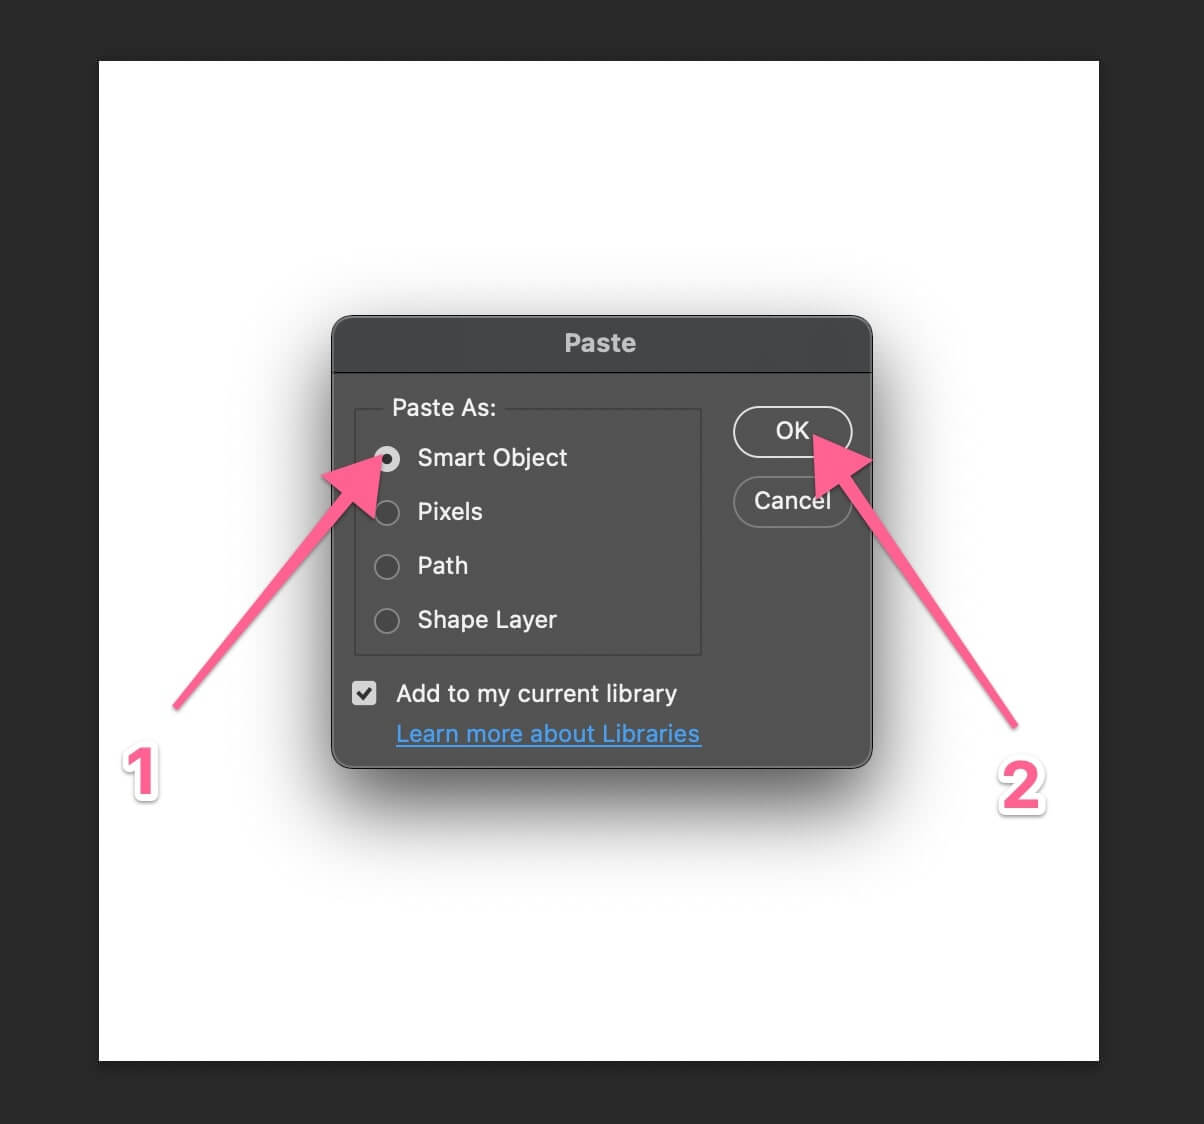 paste vector graphic as smart object in Photoshop